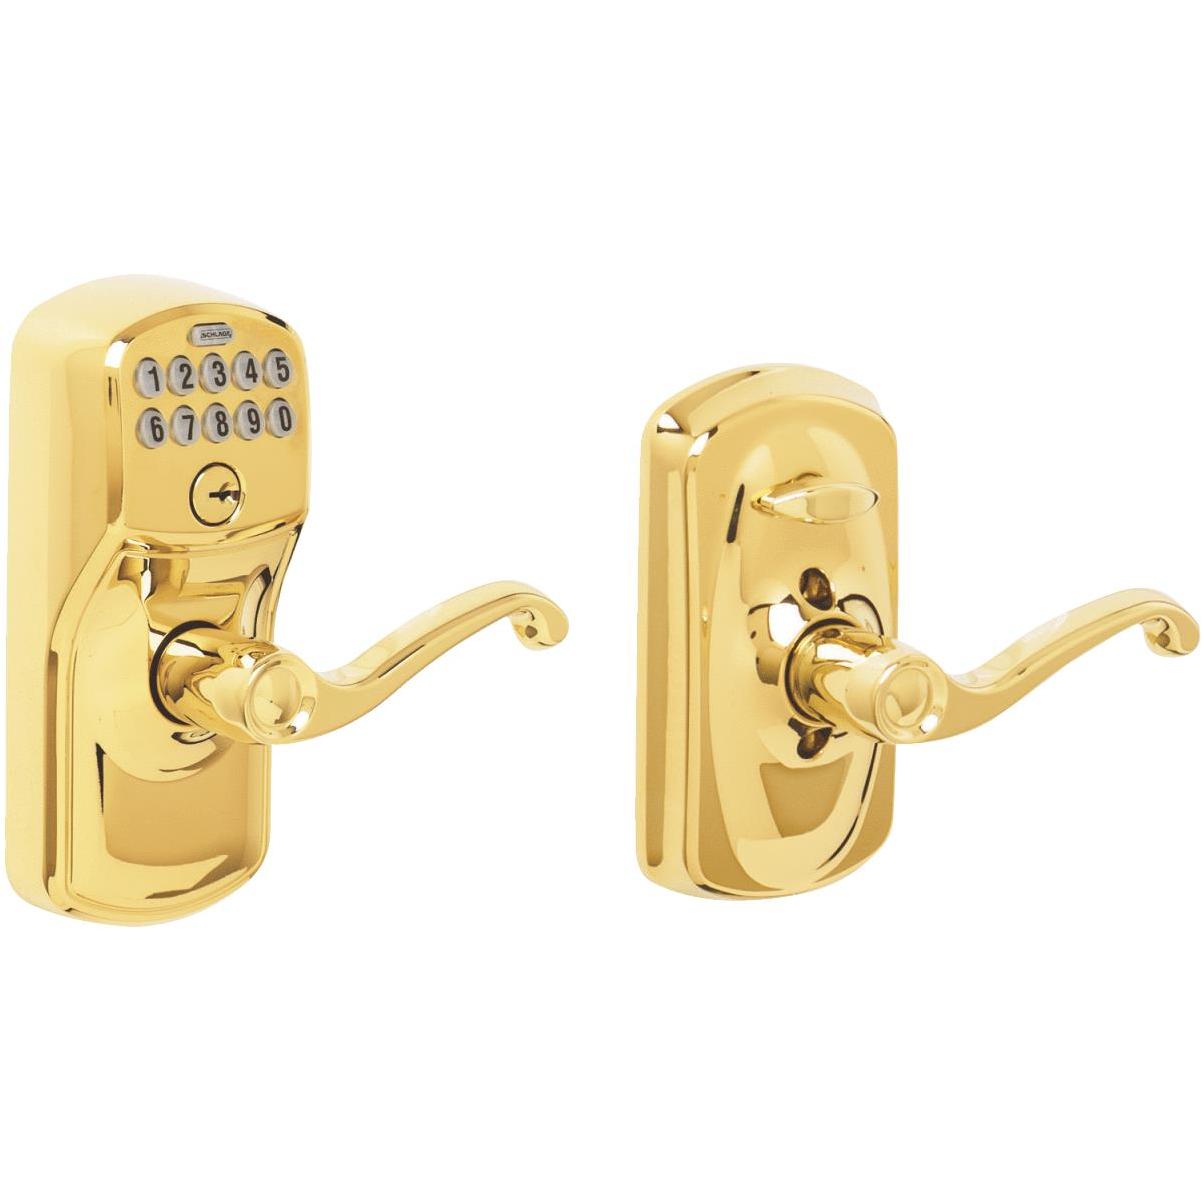 Schlage Plymouth Bright Brass Electronic Keypad Entry Lock Hills Flat  Lumber